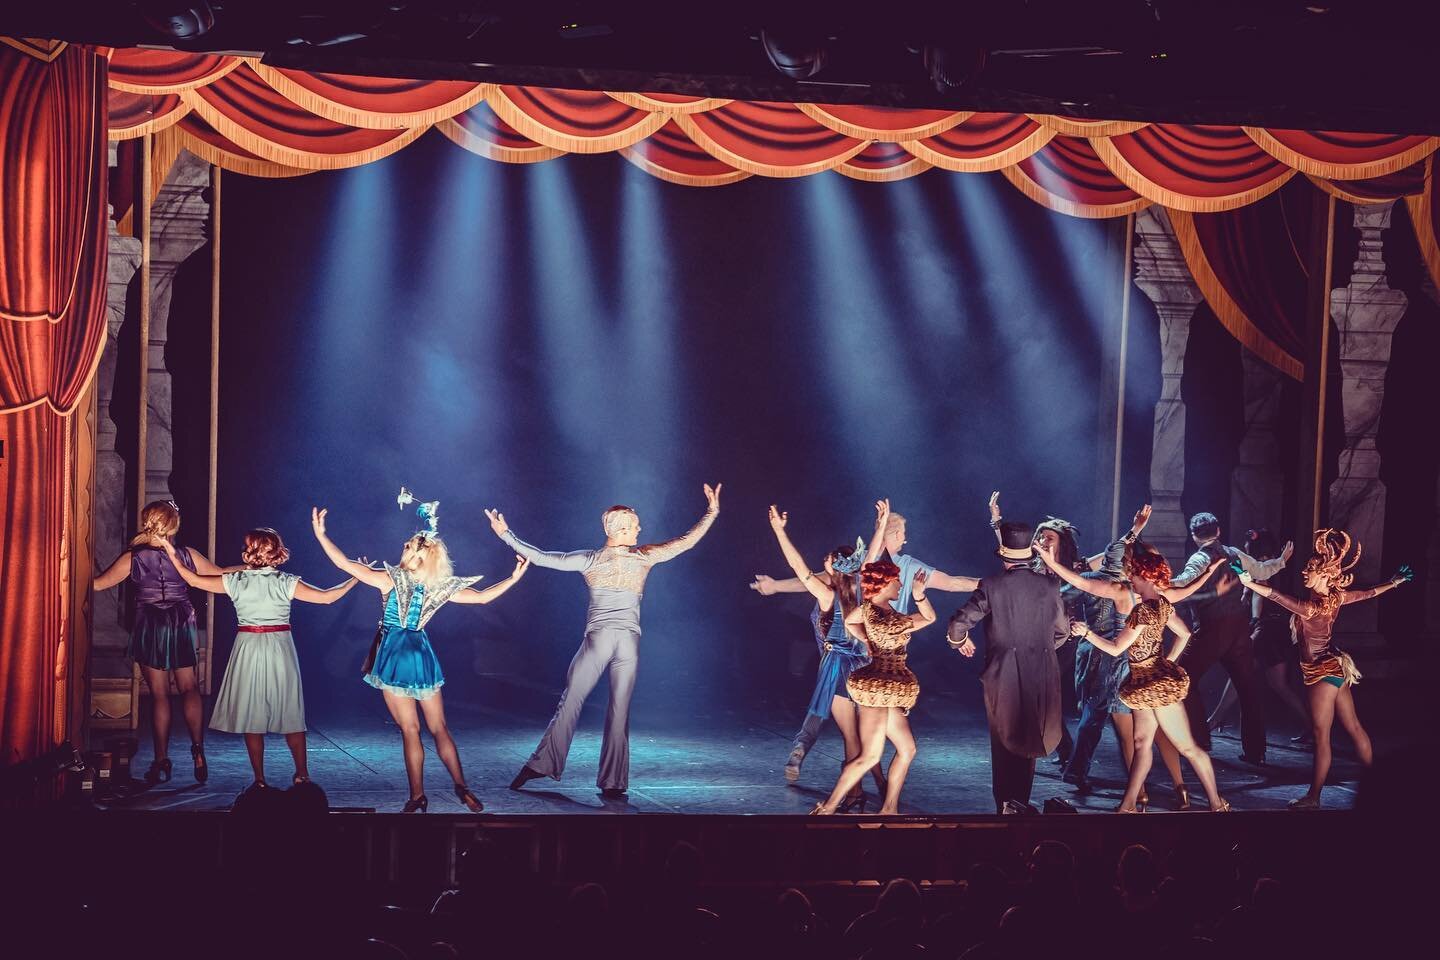 Who would be keen for a good old Broadway style routine? Theatre jazz can be so much fun! What&rsquo;s your favourite musical number? 👯&zwj;♀️👯

#rainydayinspiration #danceeveryday #broadwayjazz #coredancecollective #nevertoolatetotrysomethingnew #